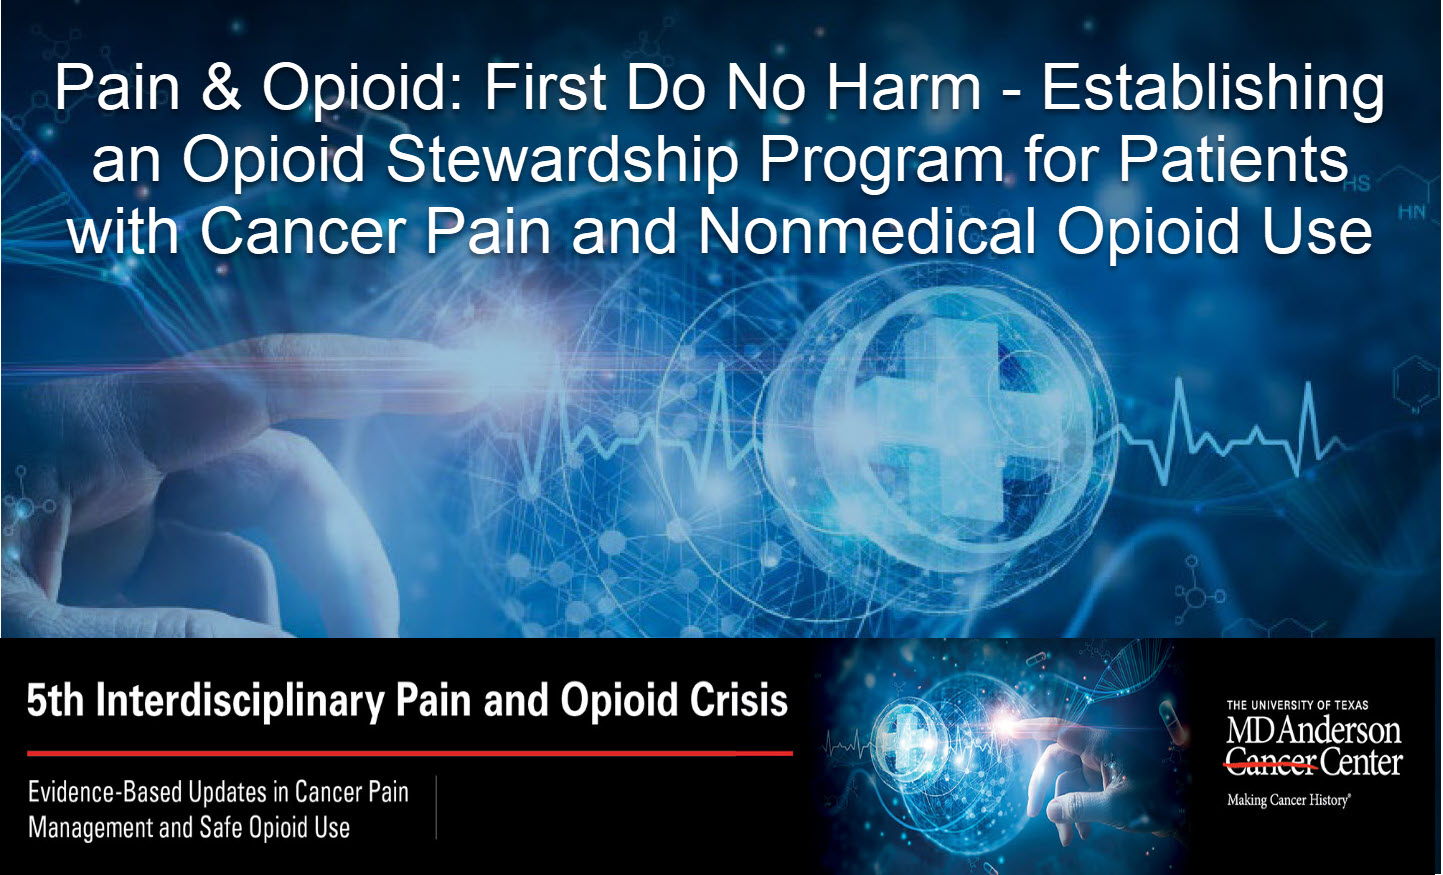 First Do No Harm - Establishing an Opioid Stewardship Program for Patients with Cancer Pain and Nonmedical Opioid Use Banner